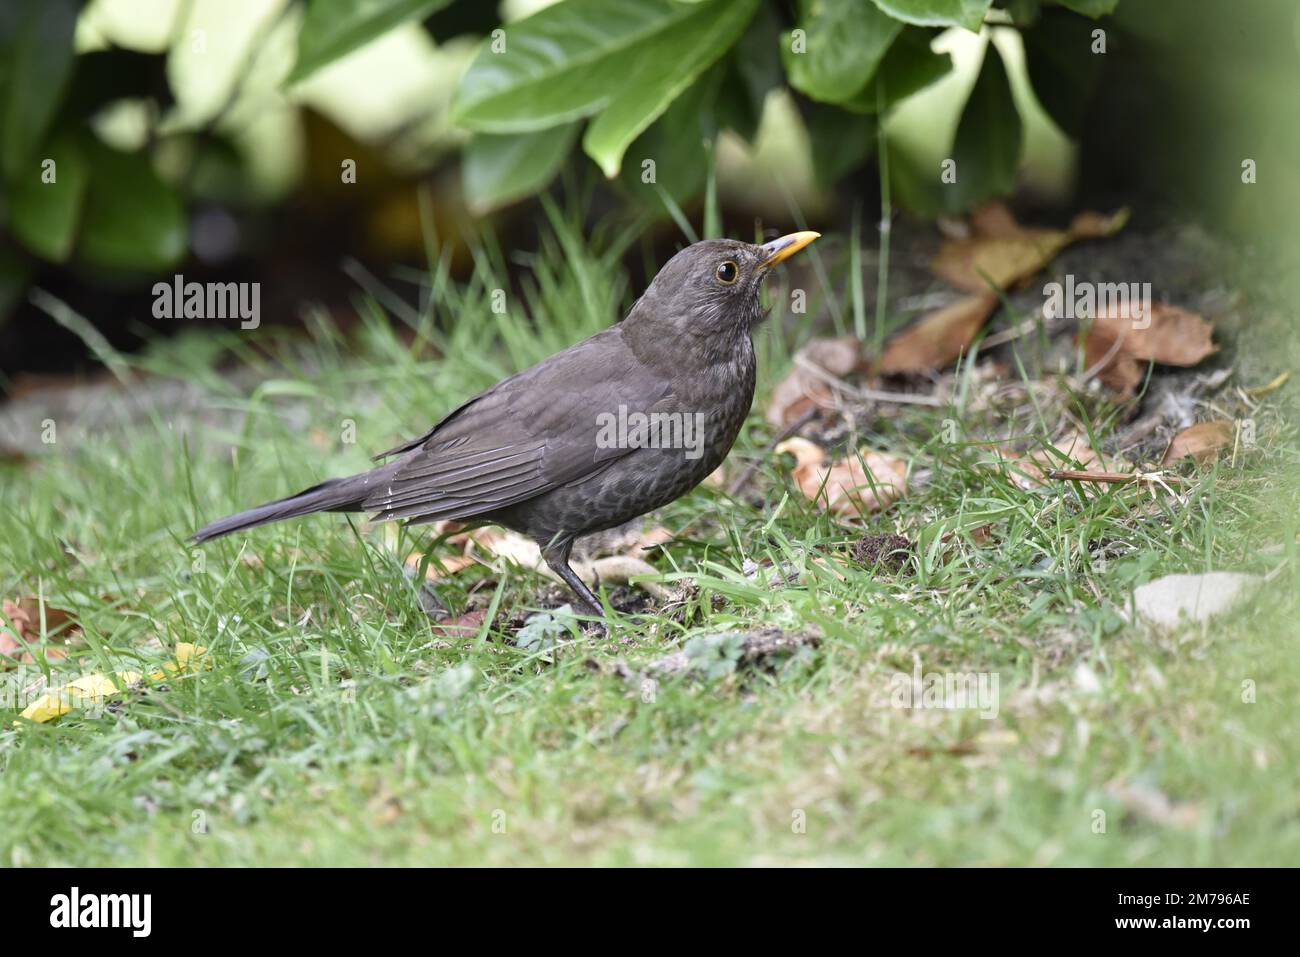 Close-Up Right-Profile Image of a Young Male Common Blackbird (Turdus merula) Walking on Grass and Dry Leaves with Leafy Background in July in the UK Stock Photo